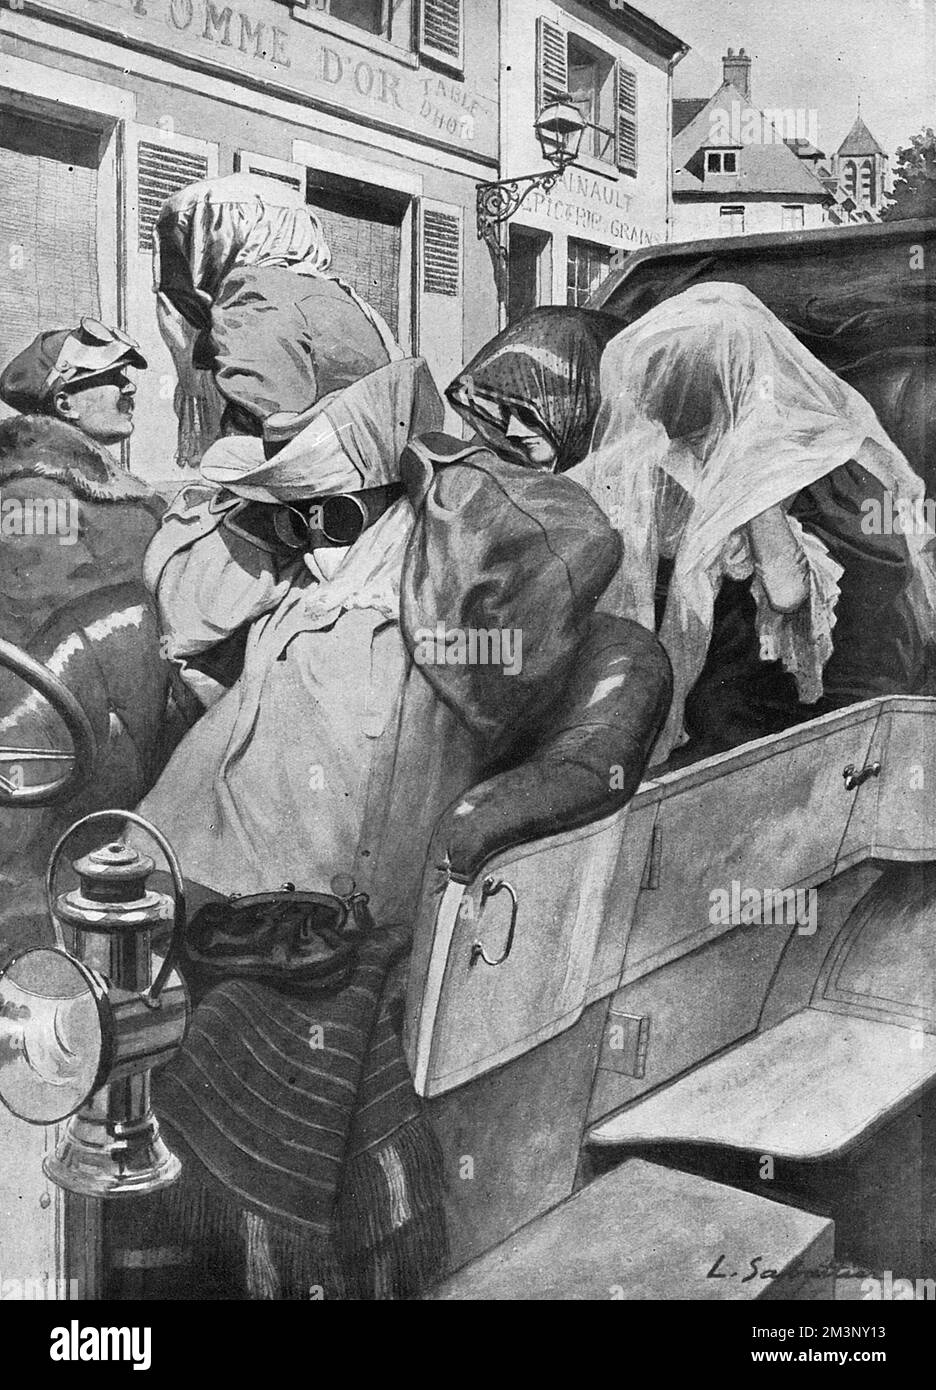 The evolution of road travel: the muffled motorist of 1905. A motoring party of 1905 arriving at their destination wearing goggles, veils and voluminous wraps. See picture 10638720 for the contrast to this style of travel in 1921.     Date: 1905 Stock Photo